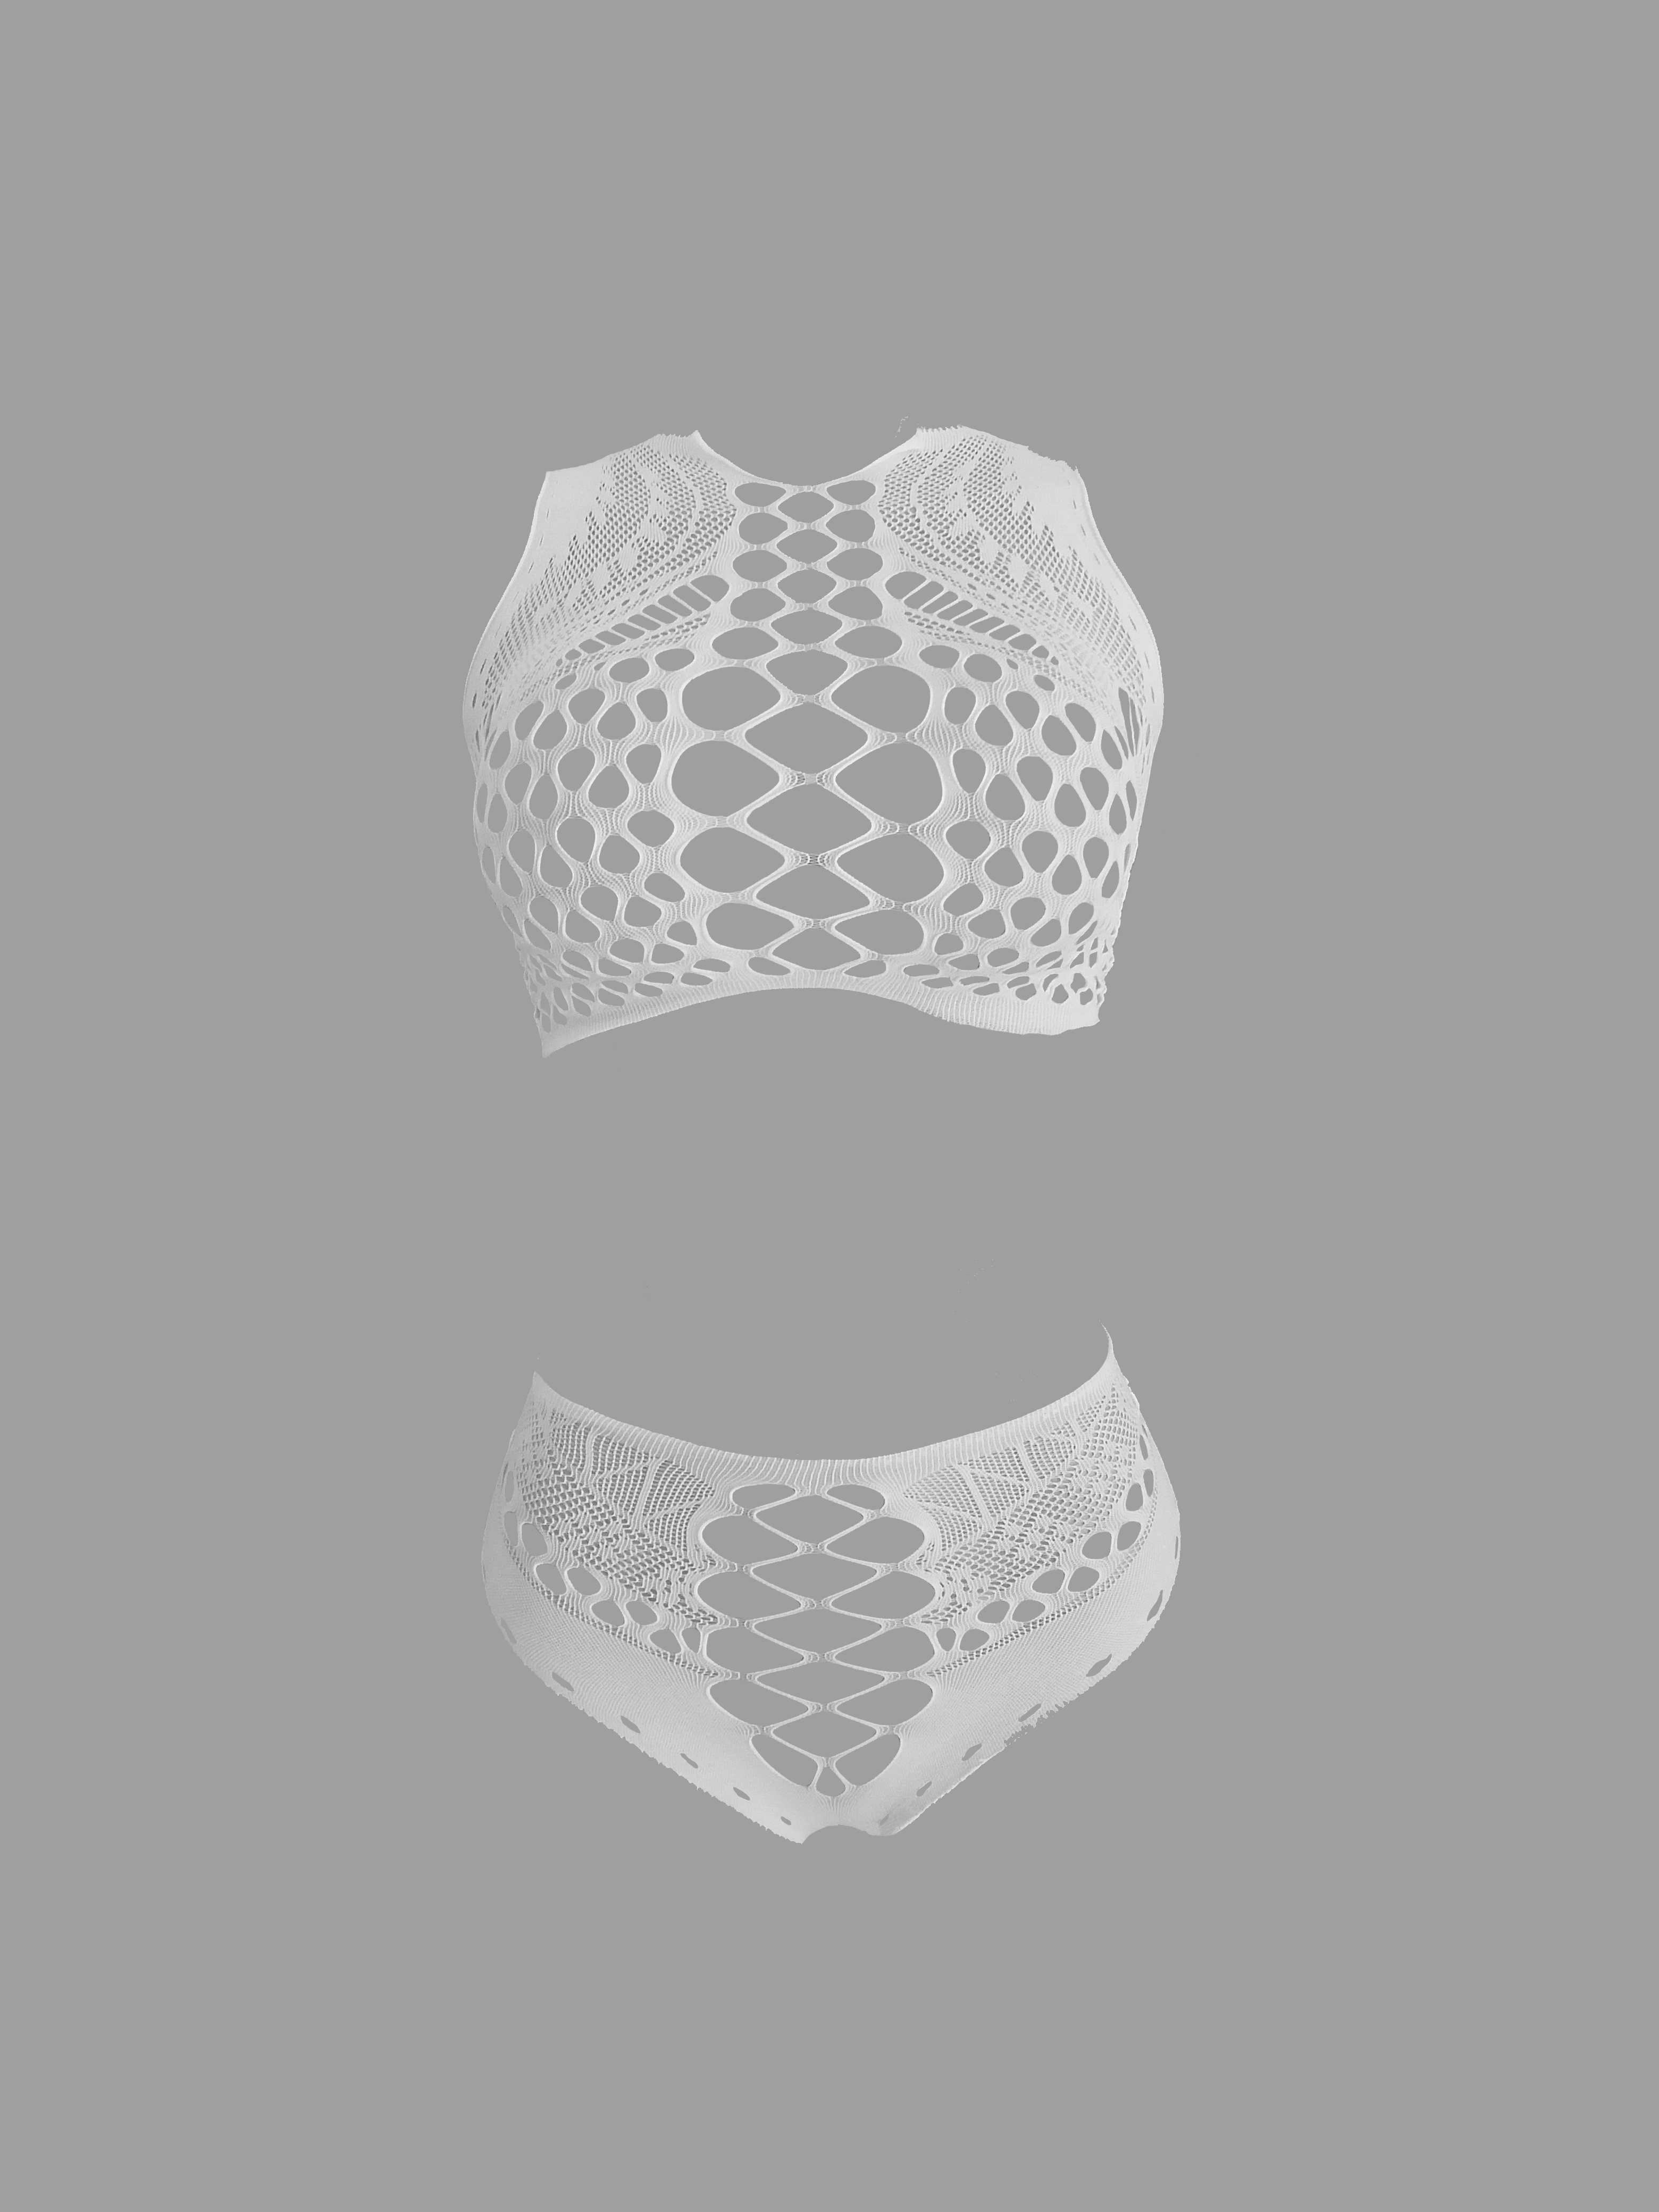 Sexy Hollow Out Lingerie Sets Women Sexy Mesh Bondage Bra and